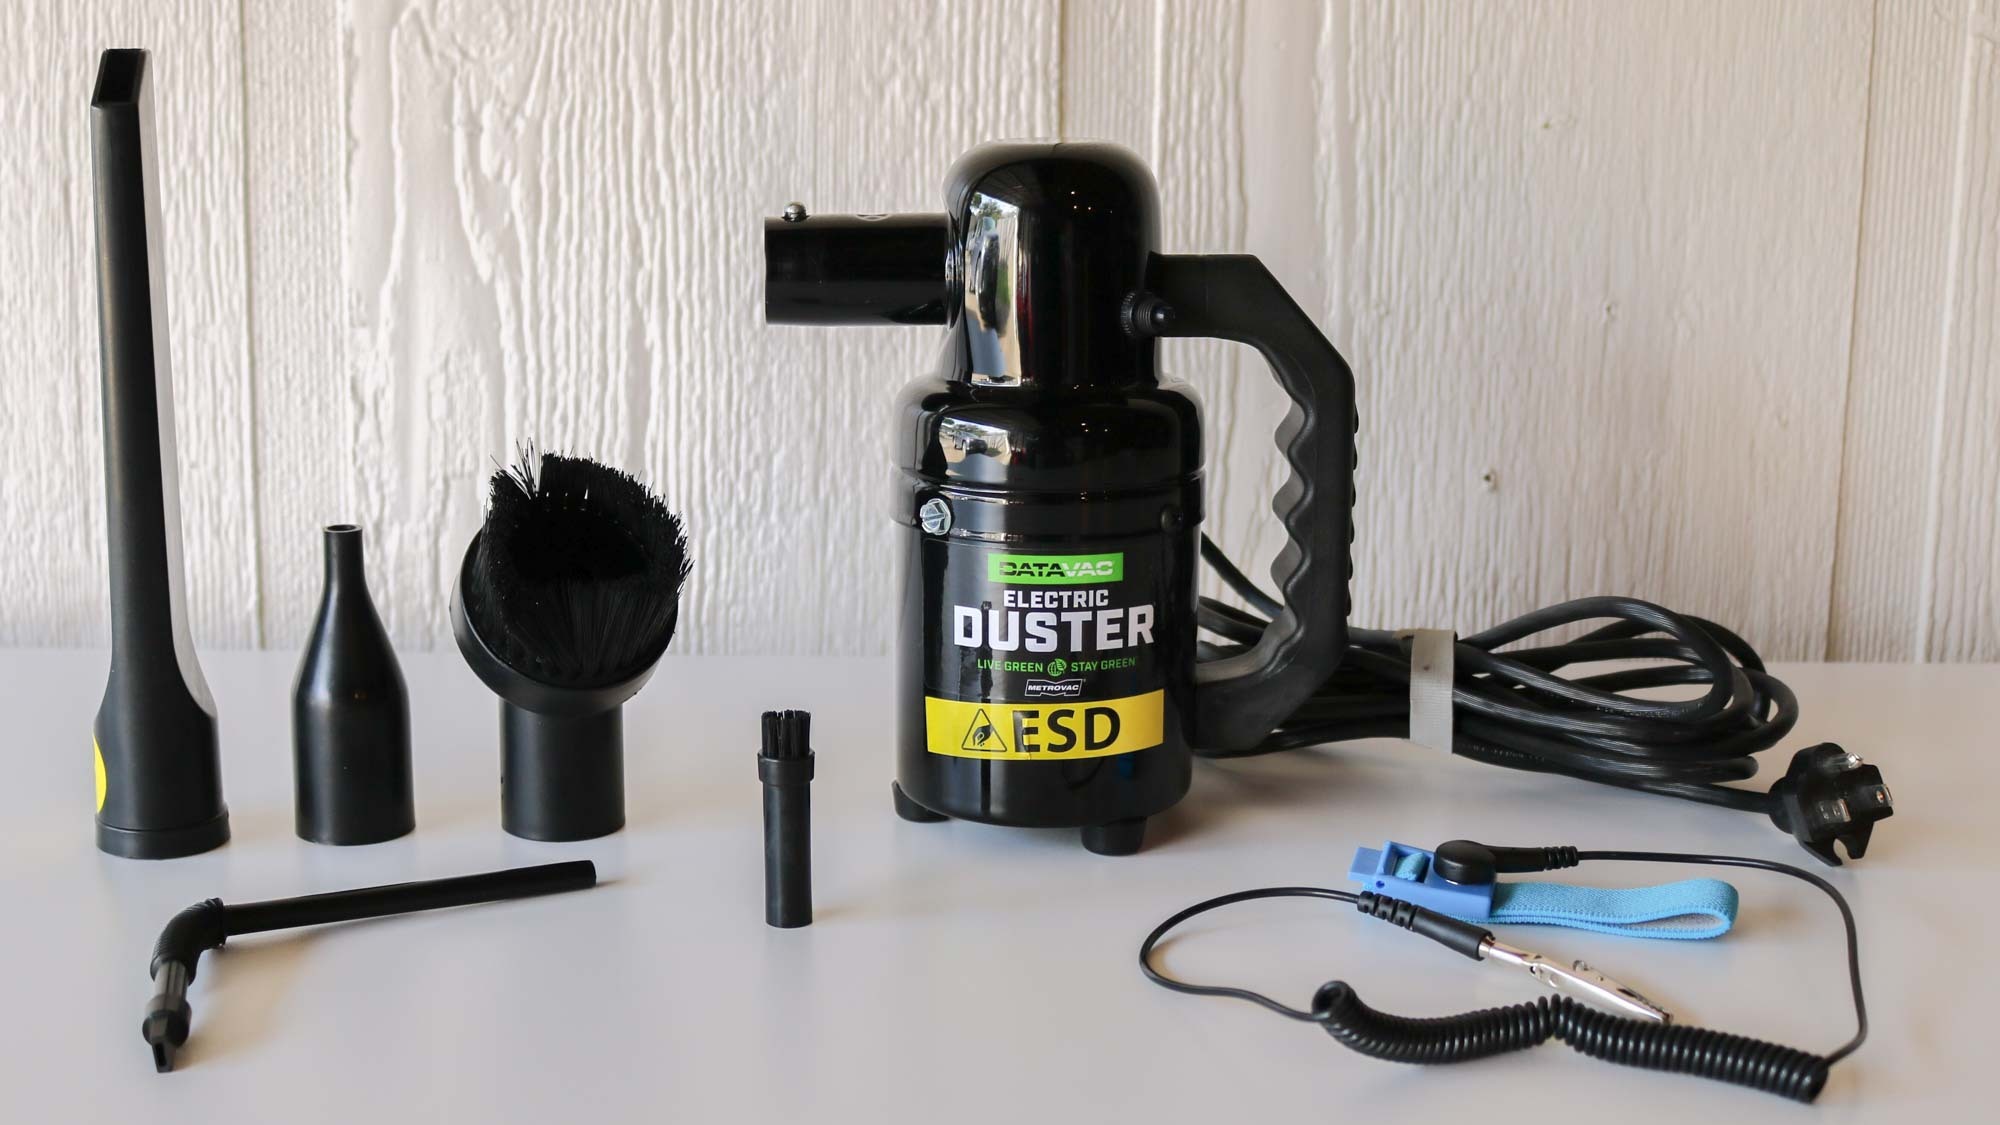 A picture of the DataVac ED-500-ESD electric duster with all of its accessories